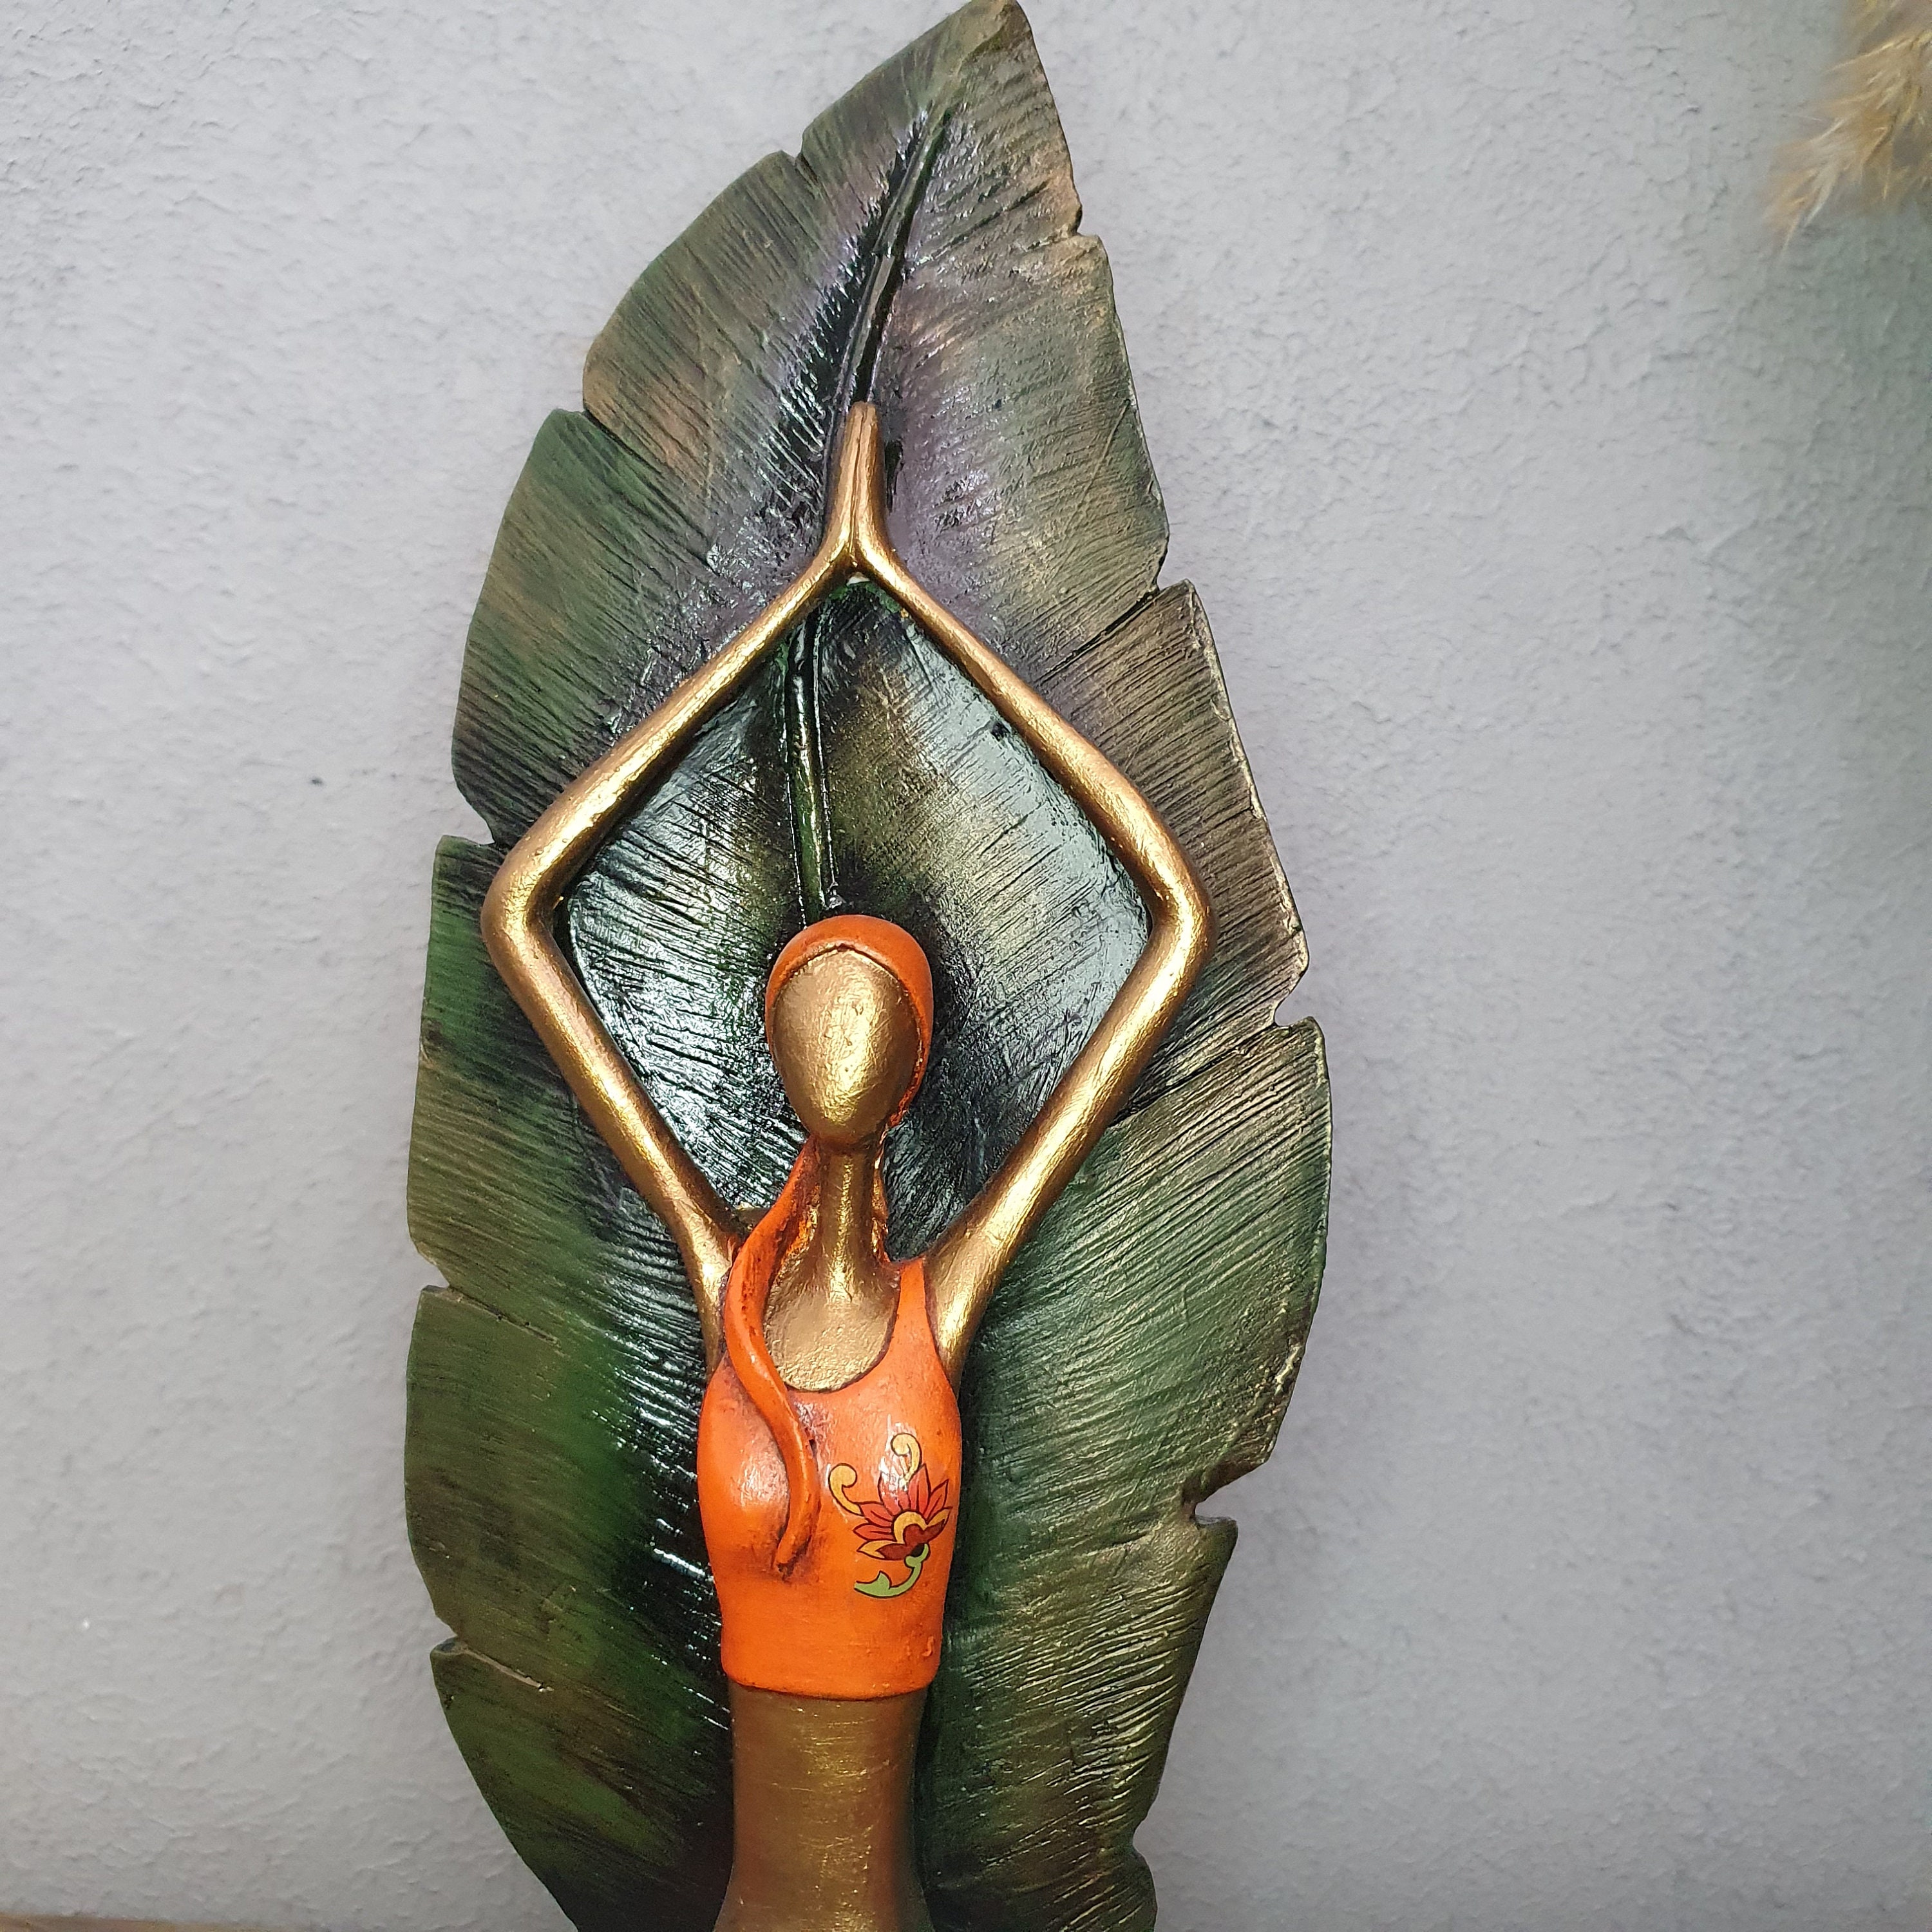 Girl Doing Leafy Yoga Sculpture, 12.21 Inches, Homedecor, Statue, Handmade  Gift, Yoga Girl, Yoga Time, Lady Sculpture, Home Gifts -  Canada